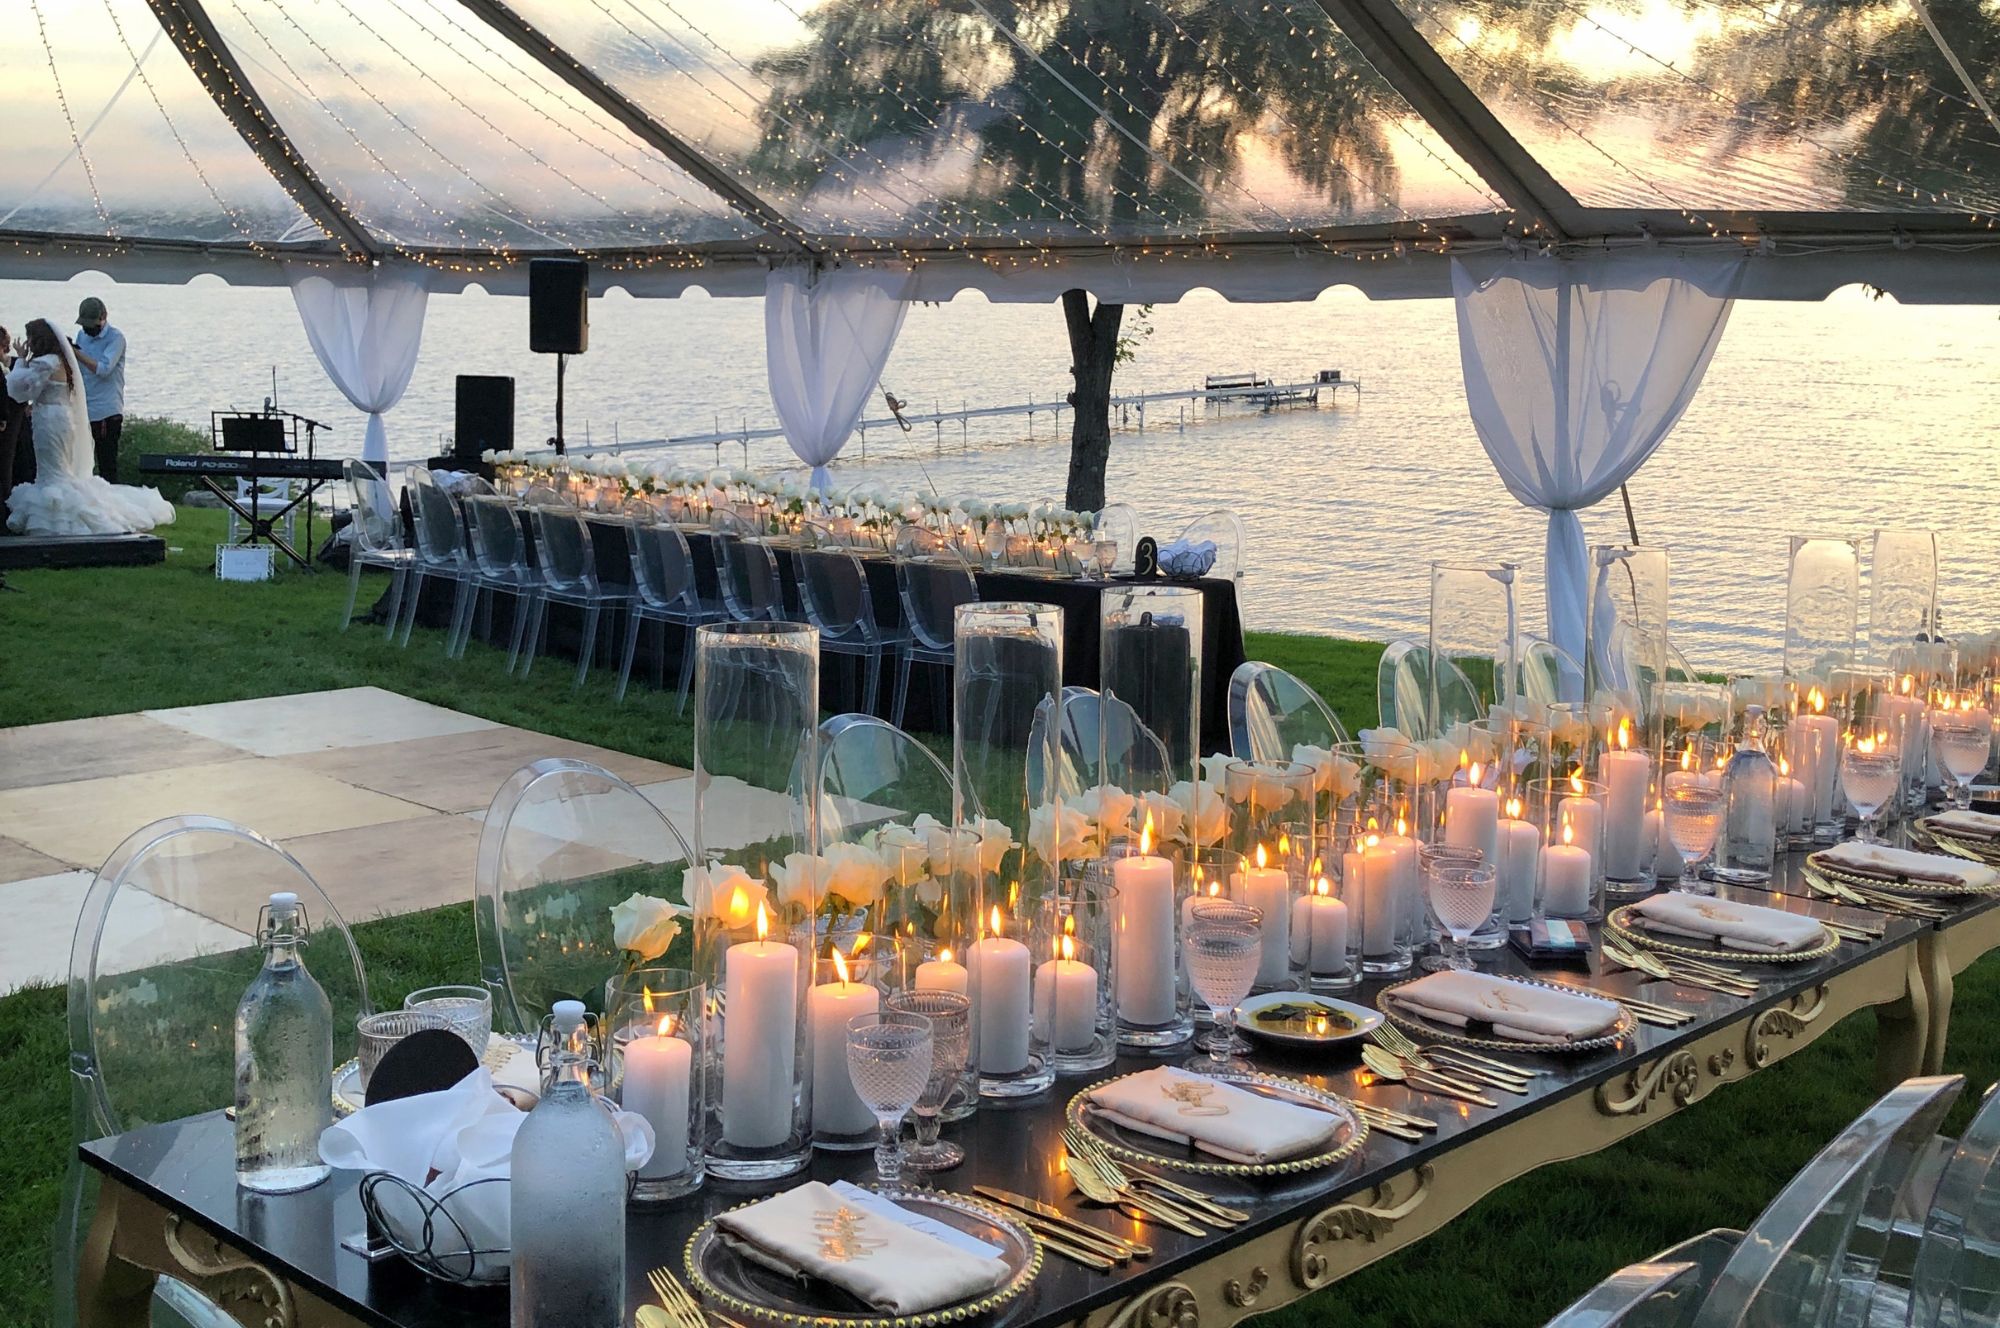 Lakeside candle lit tables under elegant clear wedding tent